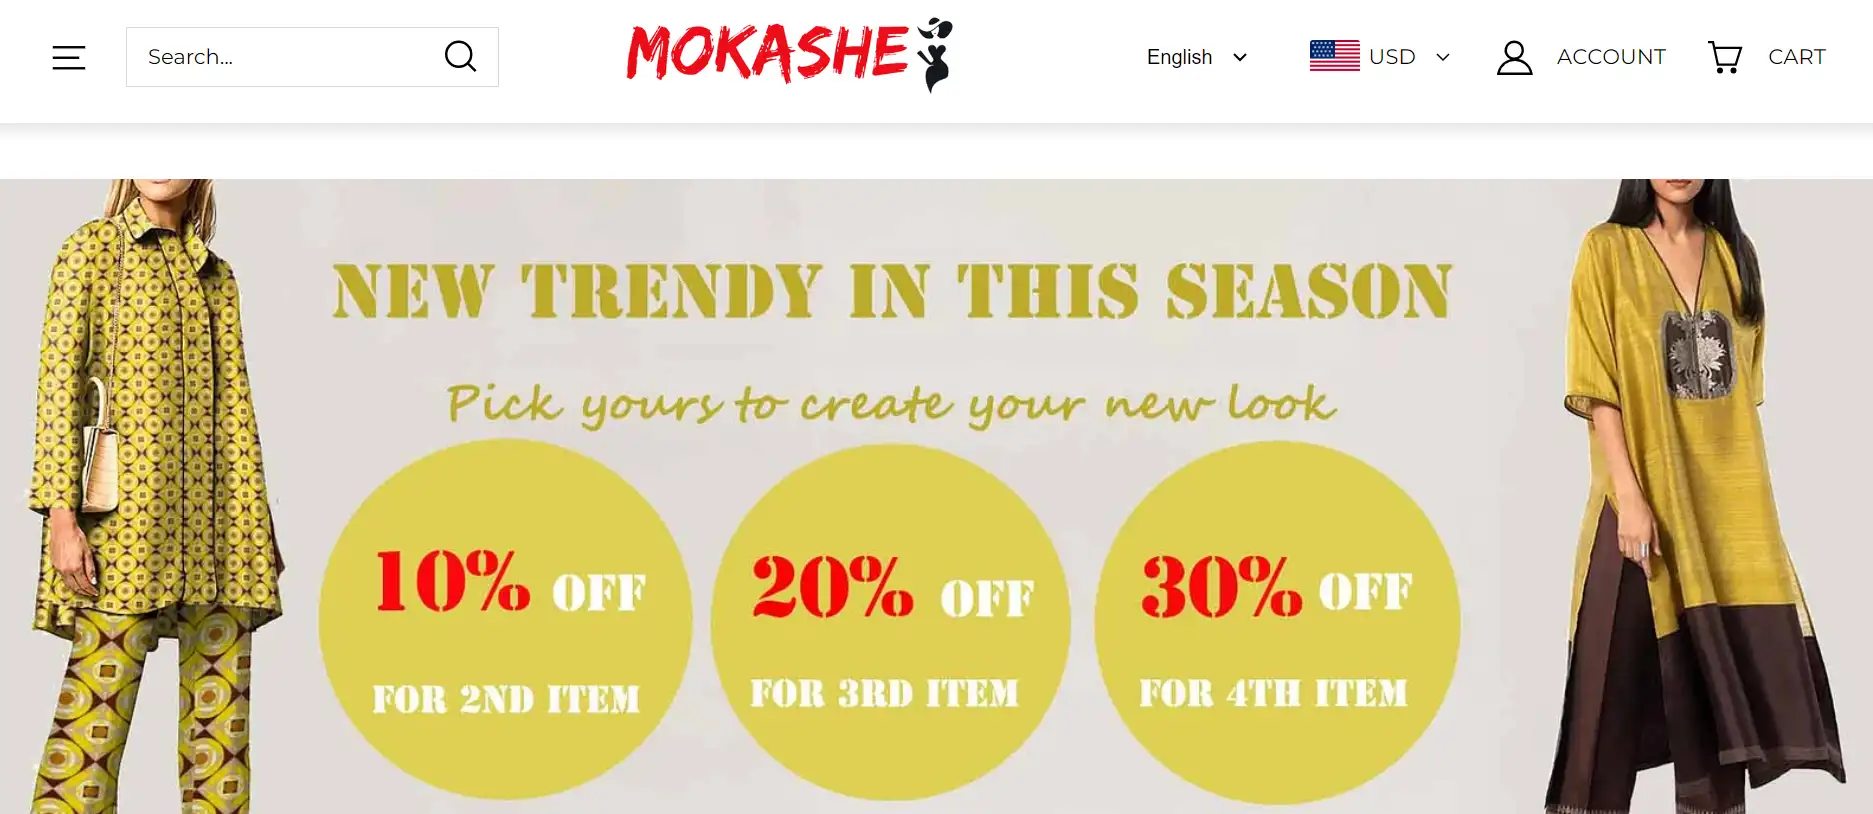 You are currently viewing Is Mokashe.com Scam or Legit? Mokashe.com Reviews